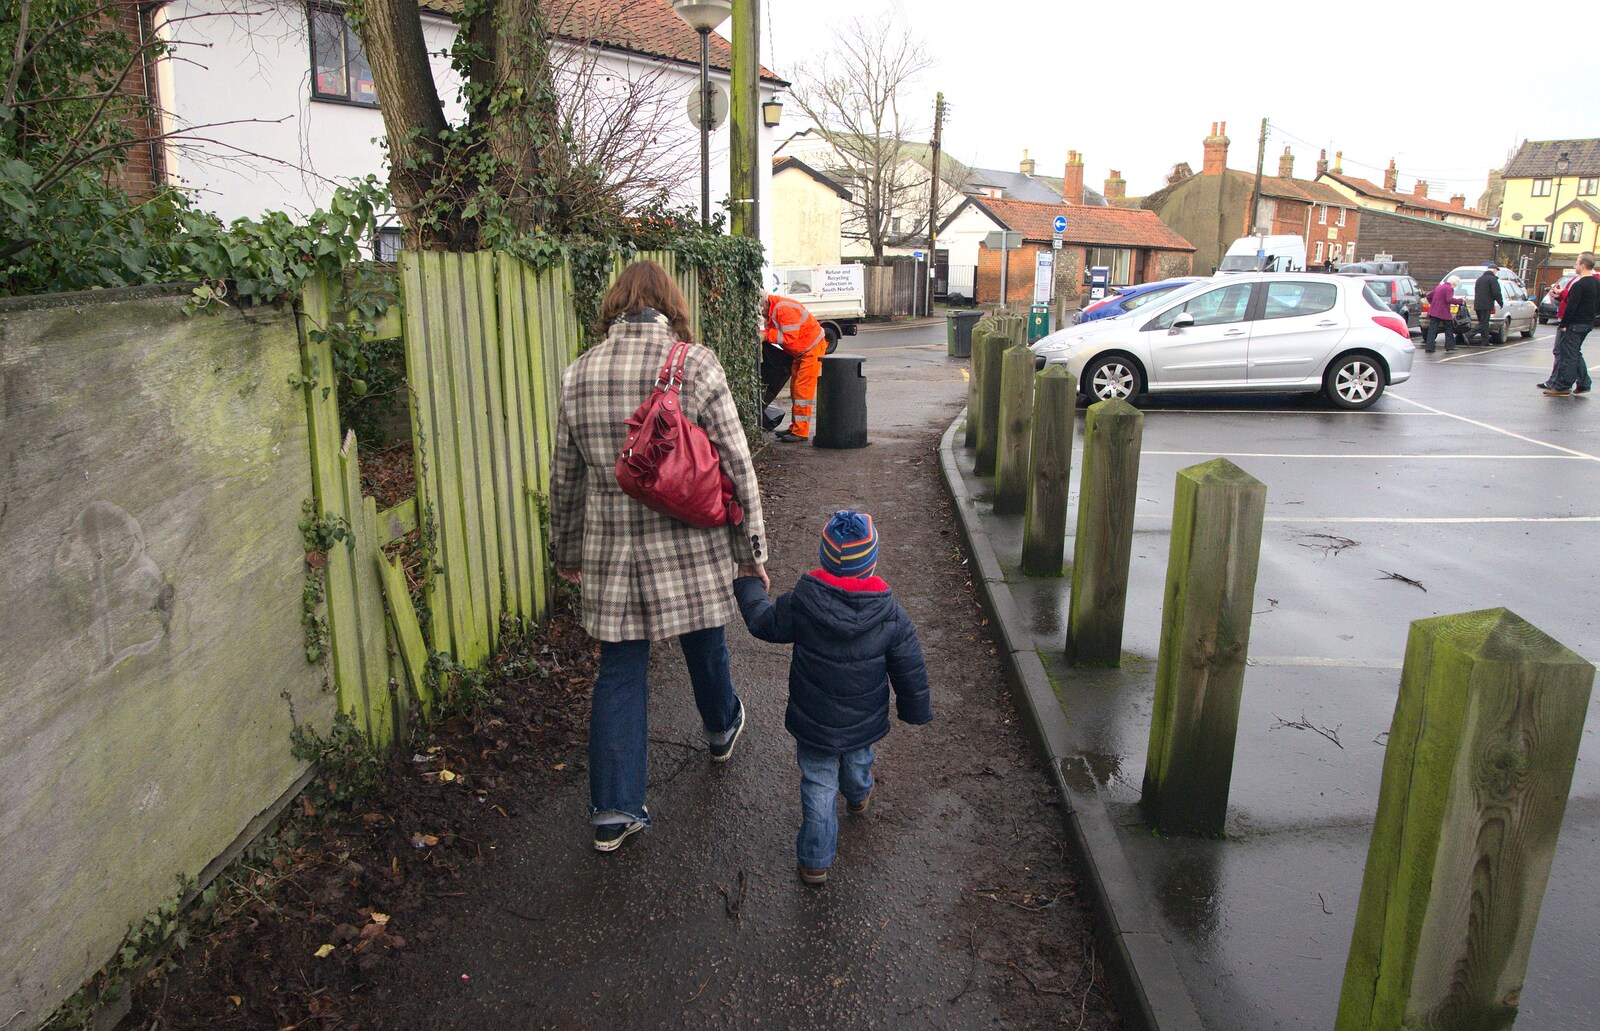 Isobel and Fred walk into Diss from Pizza Express with Grandad, Bury St. Edmunds, Suffolk - 29th December 2011